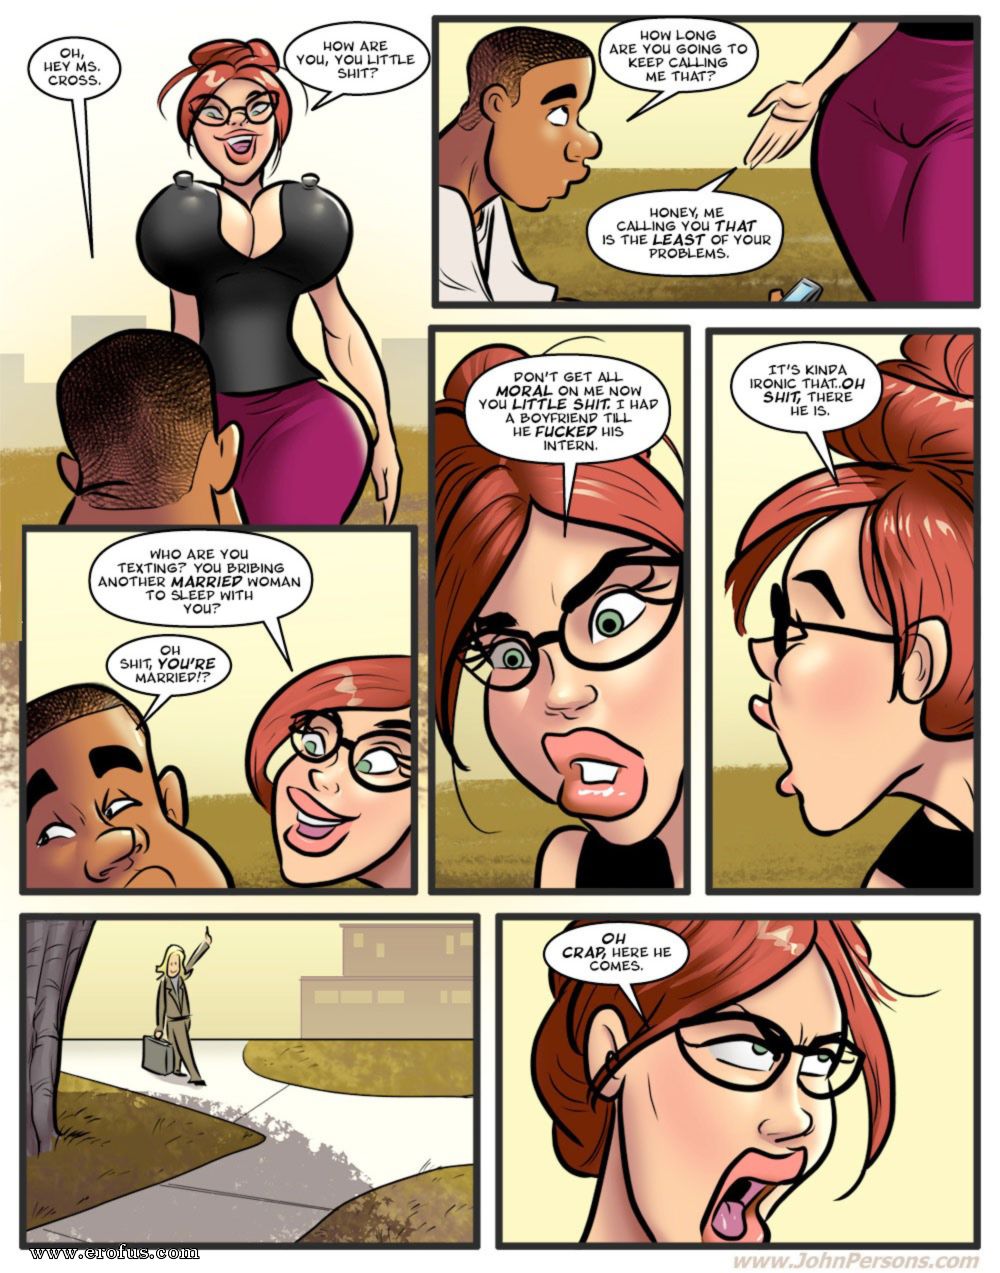 Page 3 johnpersons_com-comics/moose/hot-for-ms-cross/issue-2 Erofus